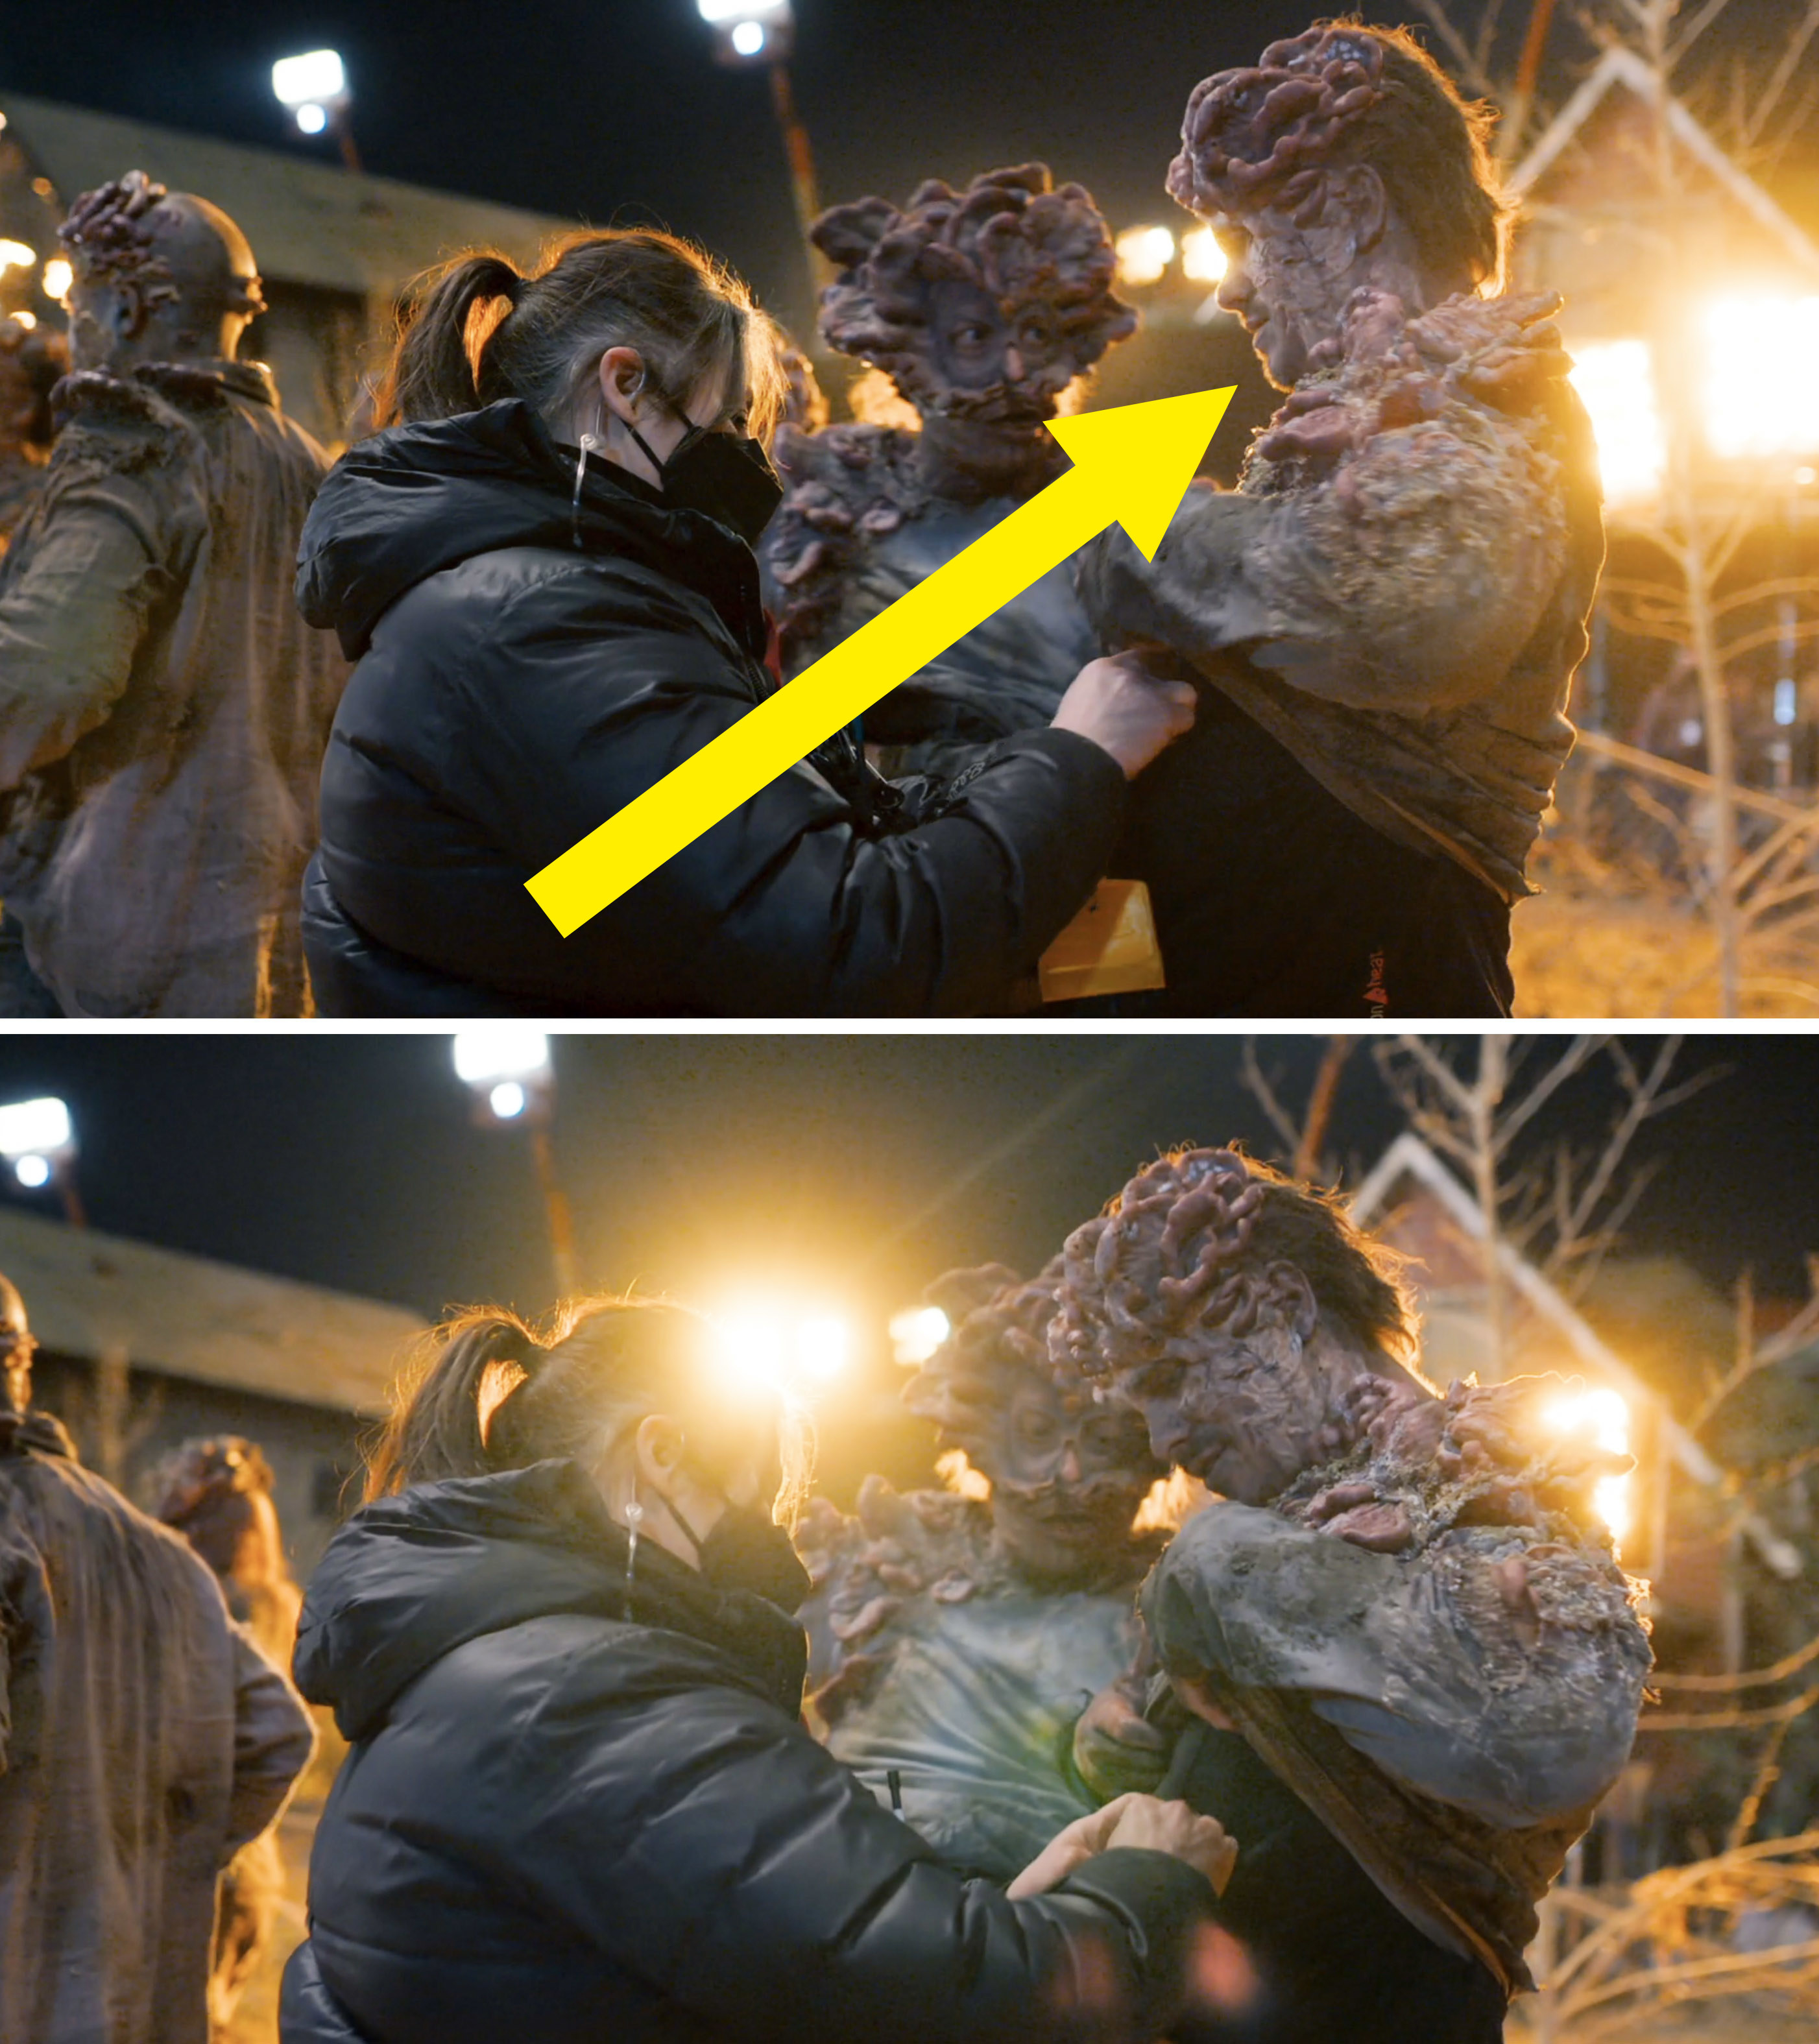 Arrow pointing to Jason in clicker makeup being prepared for a scene